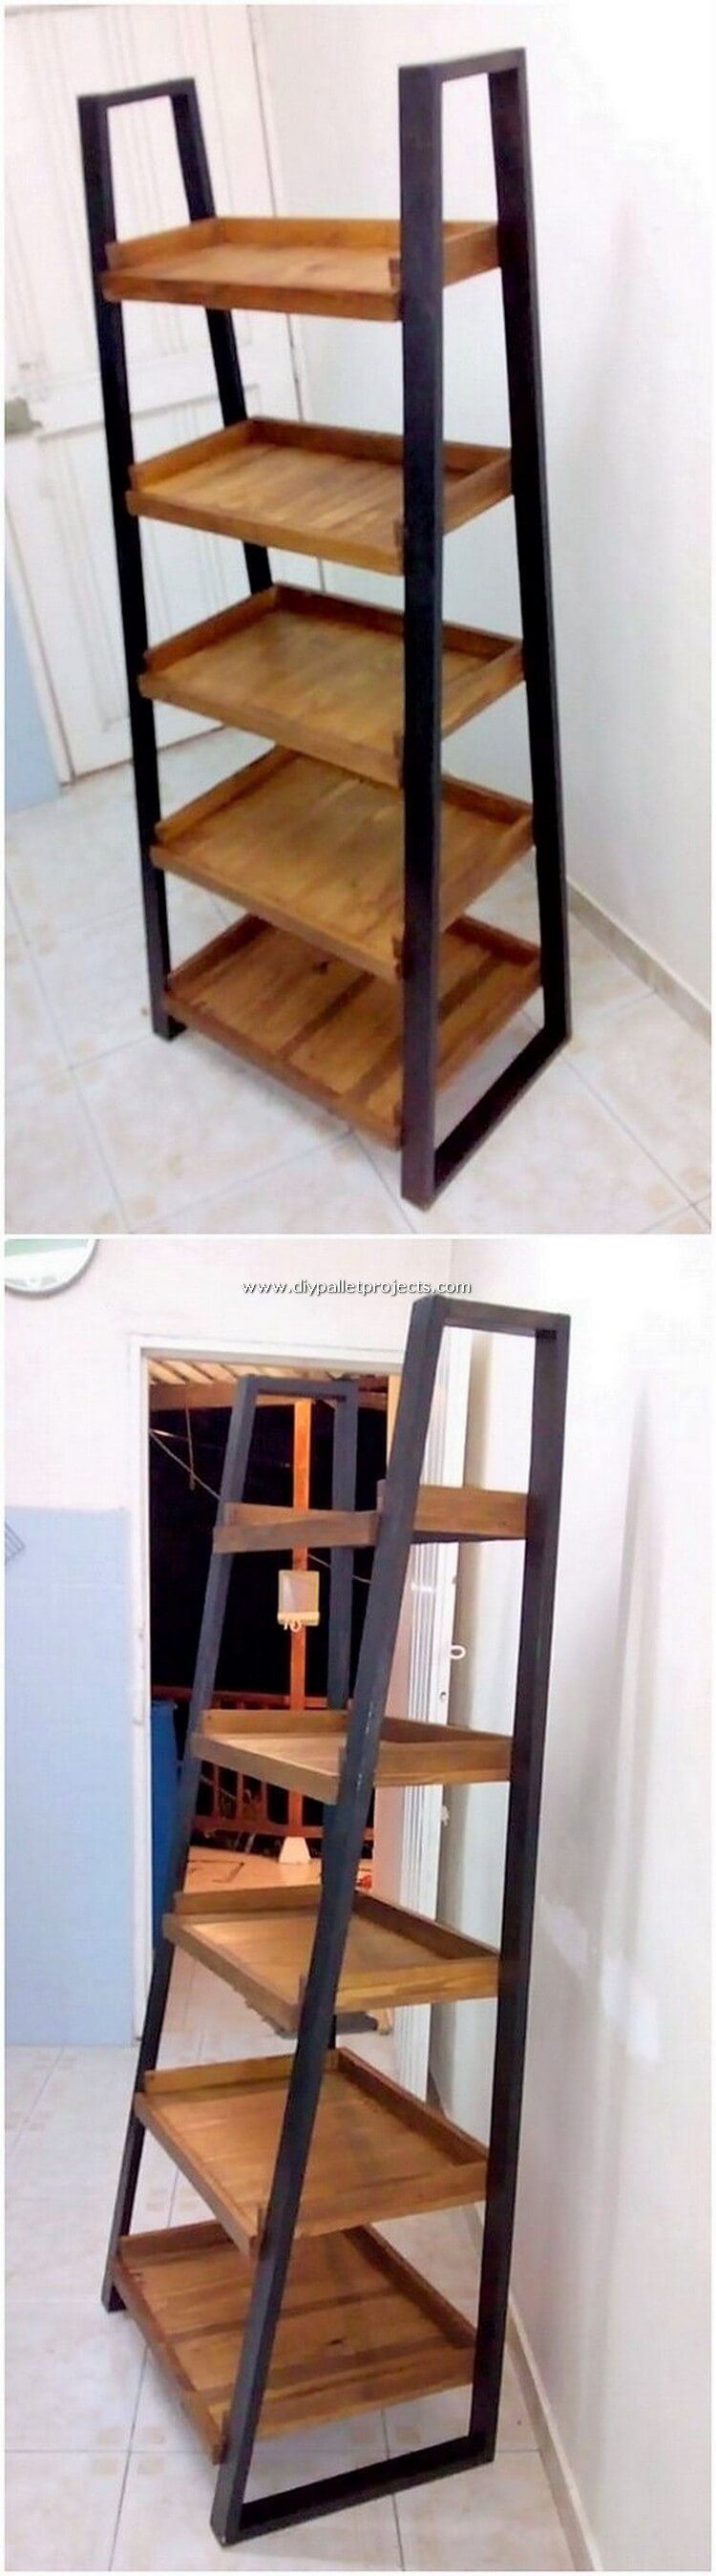 Pallet Shelving Stand